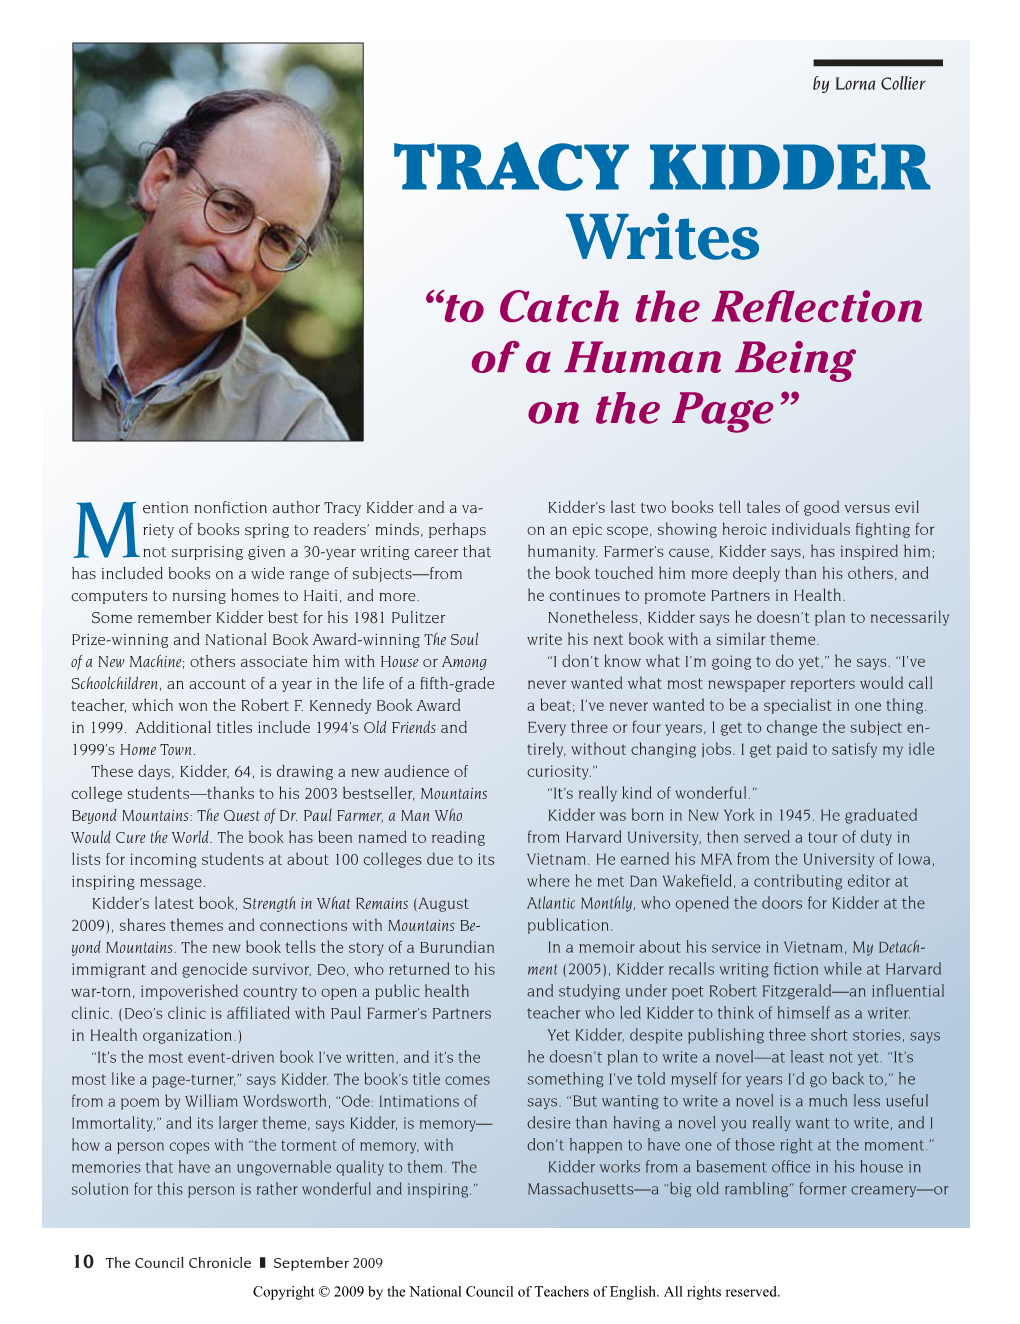 Tracy Kidder Writes “To Catch the Reflection of a Human Being on the Page”